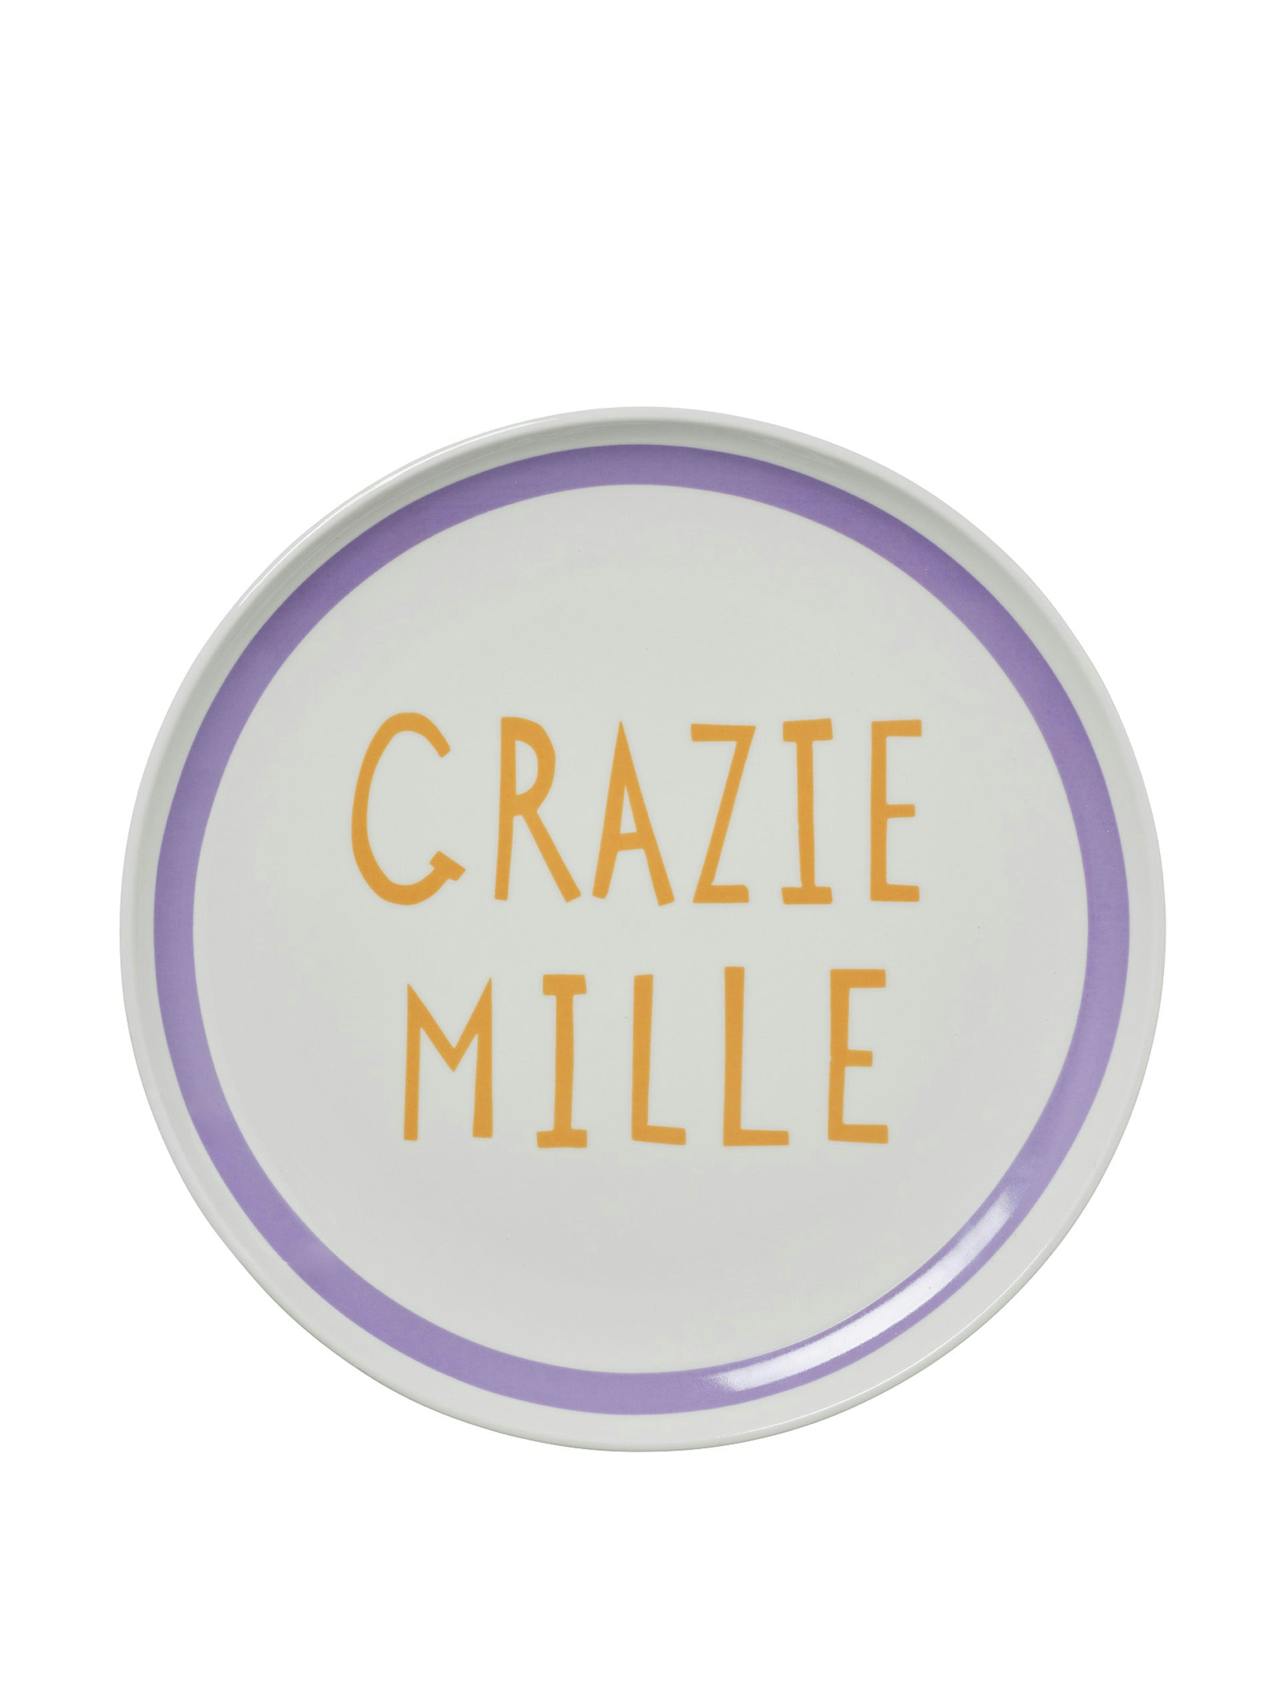 Large Grazie Mille plate